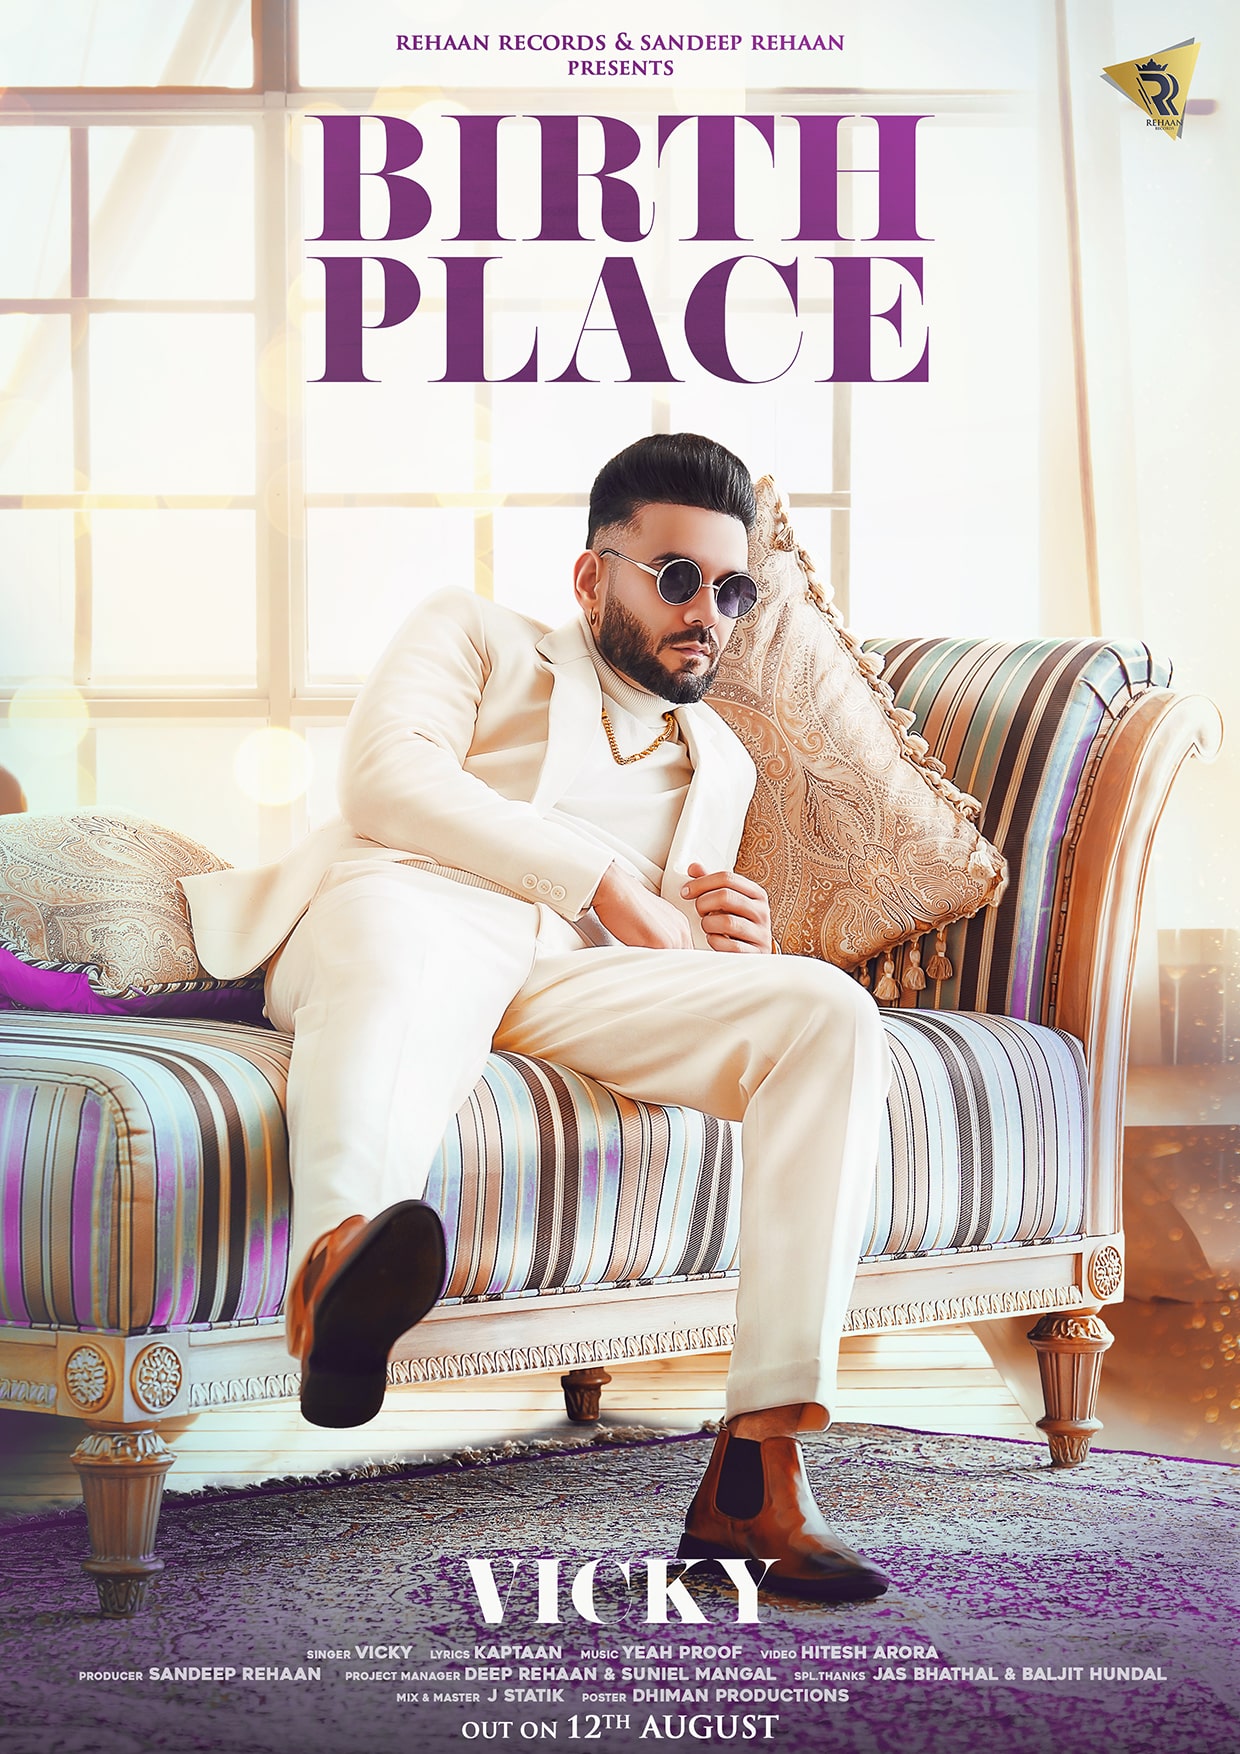 Birth Place – Vicky – Rehaan Records - Dhiman Productions